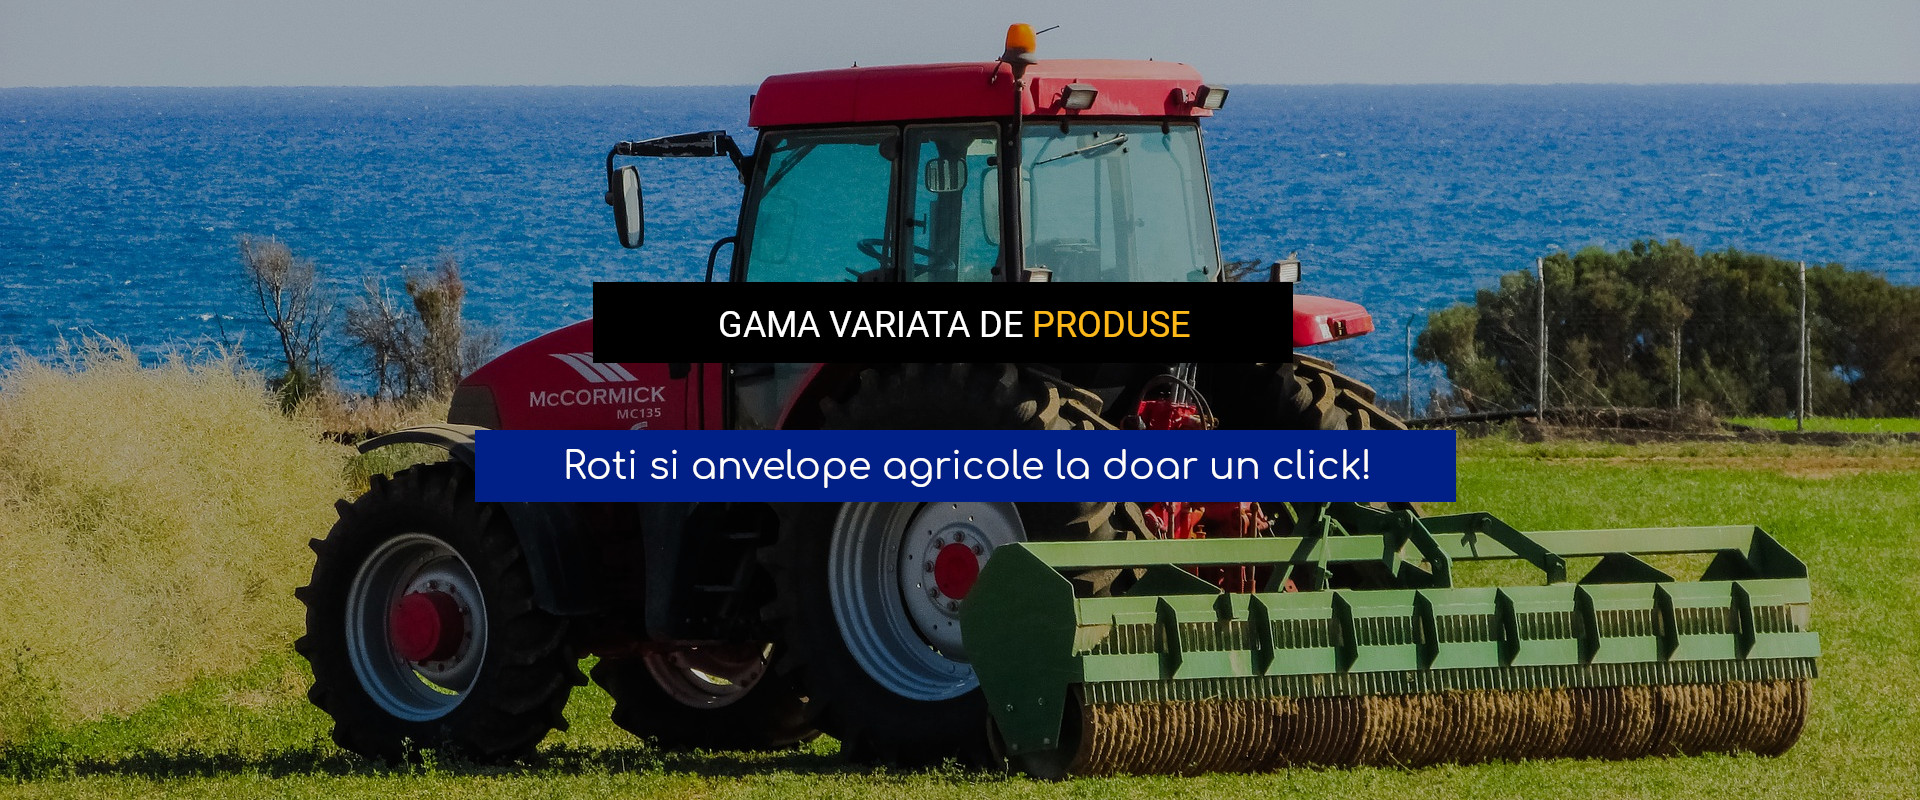 Roti si anvelope agricole